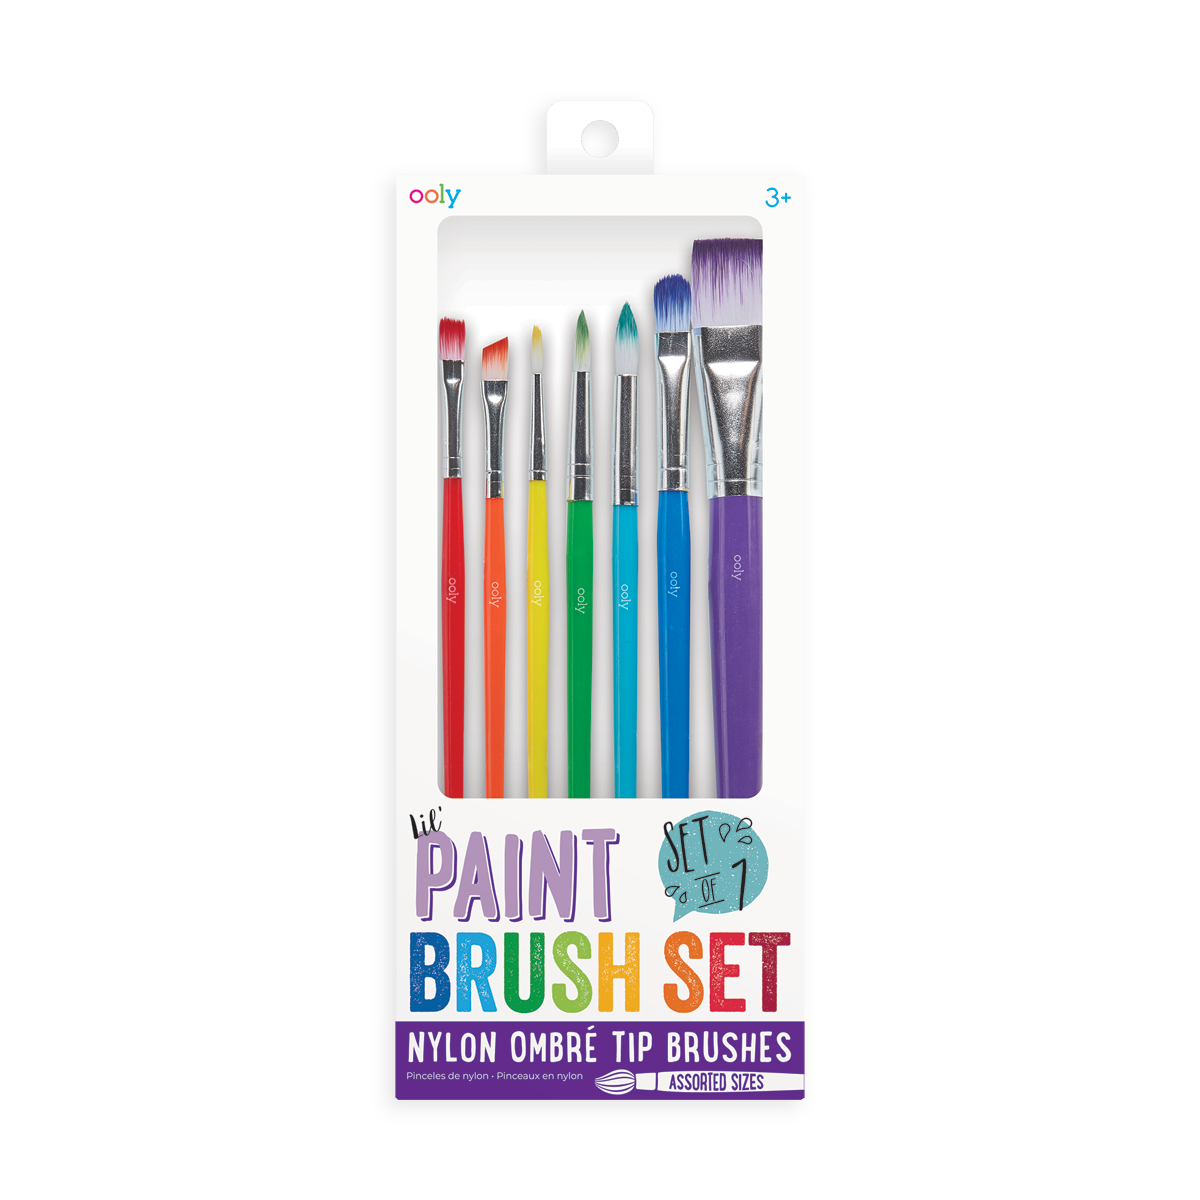 Clean PaintBrushes With This Quick Tip